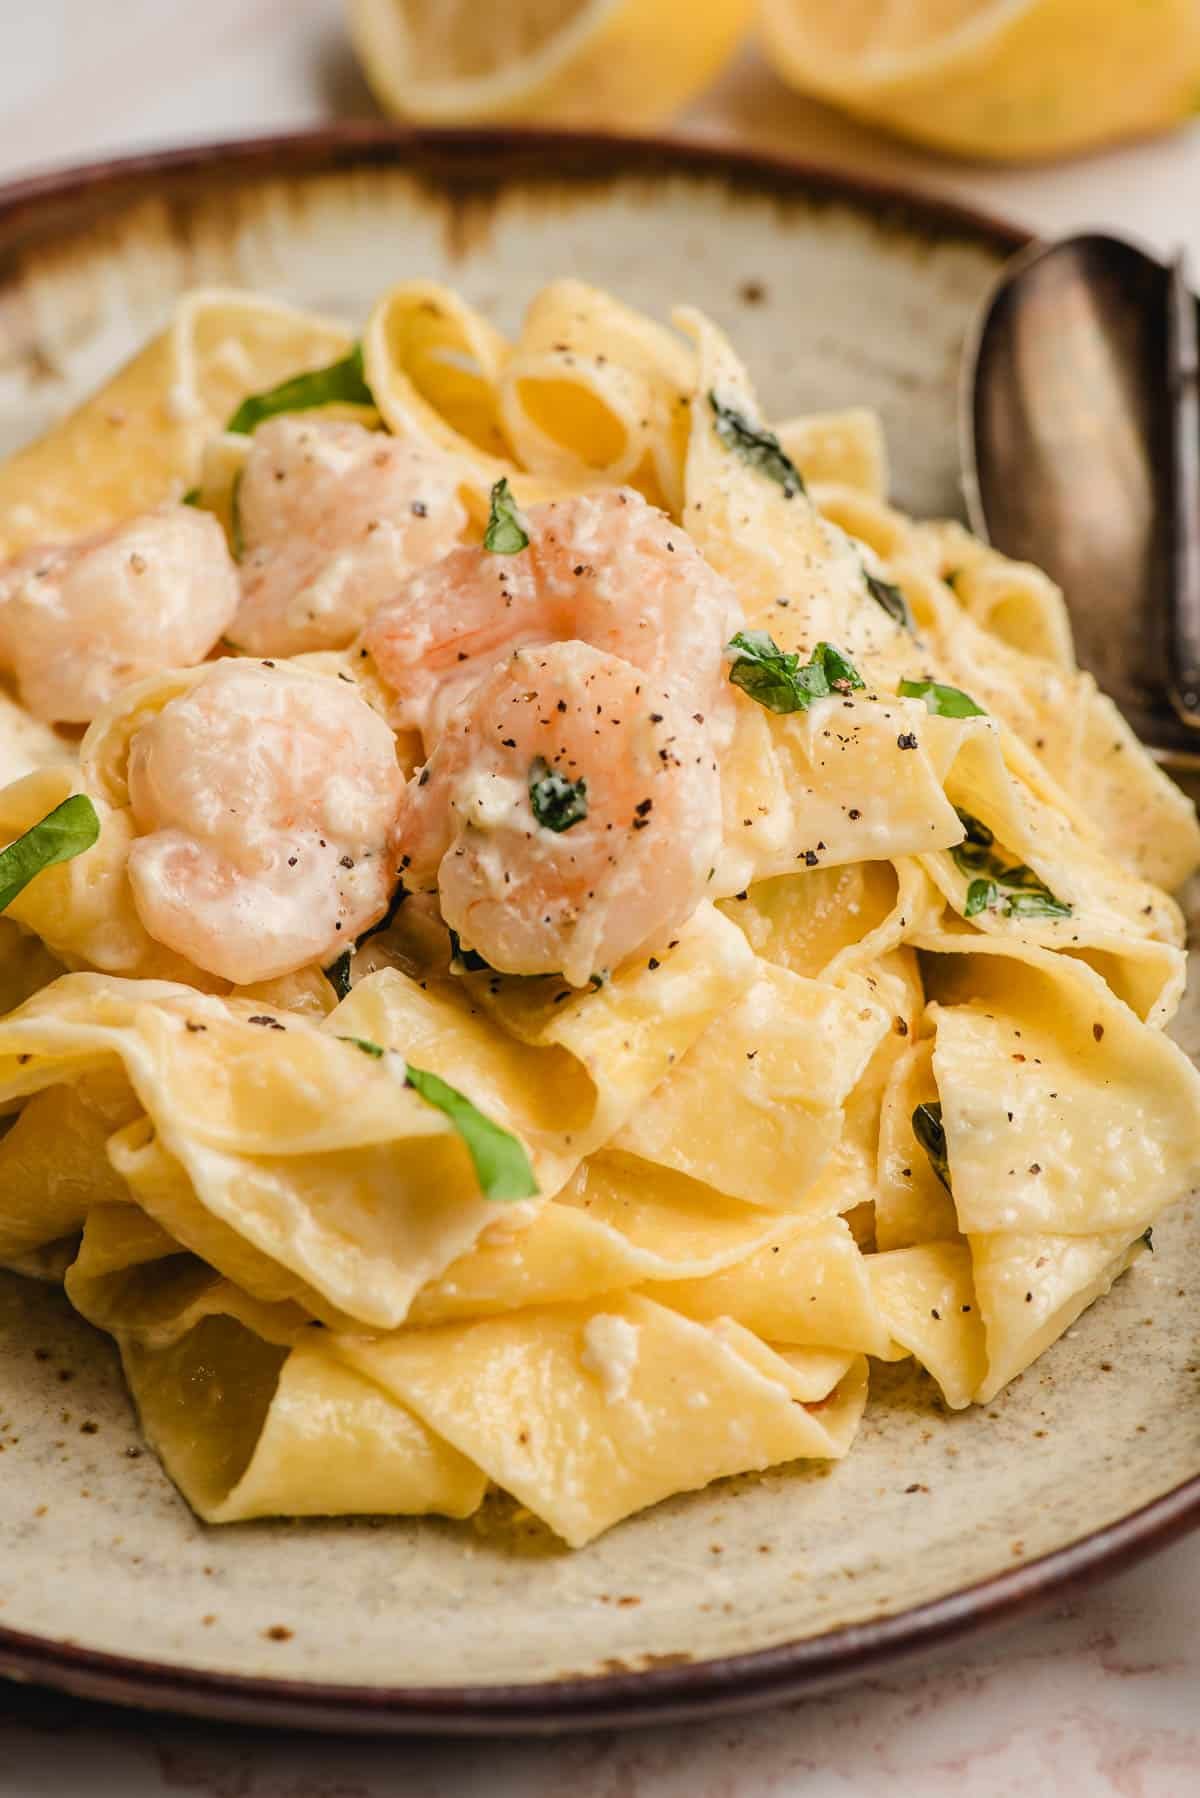 Pappardelle pasta with shrimp on a plate.